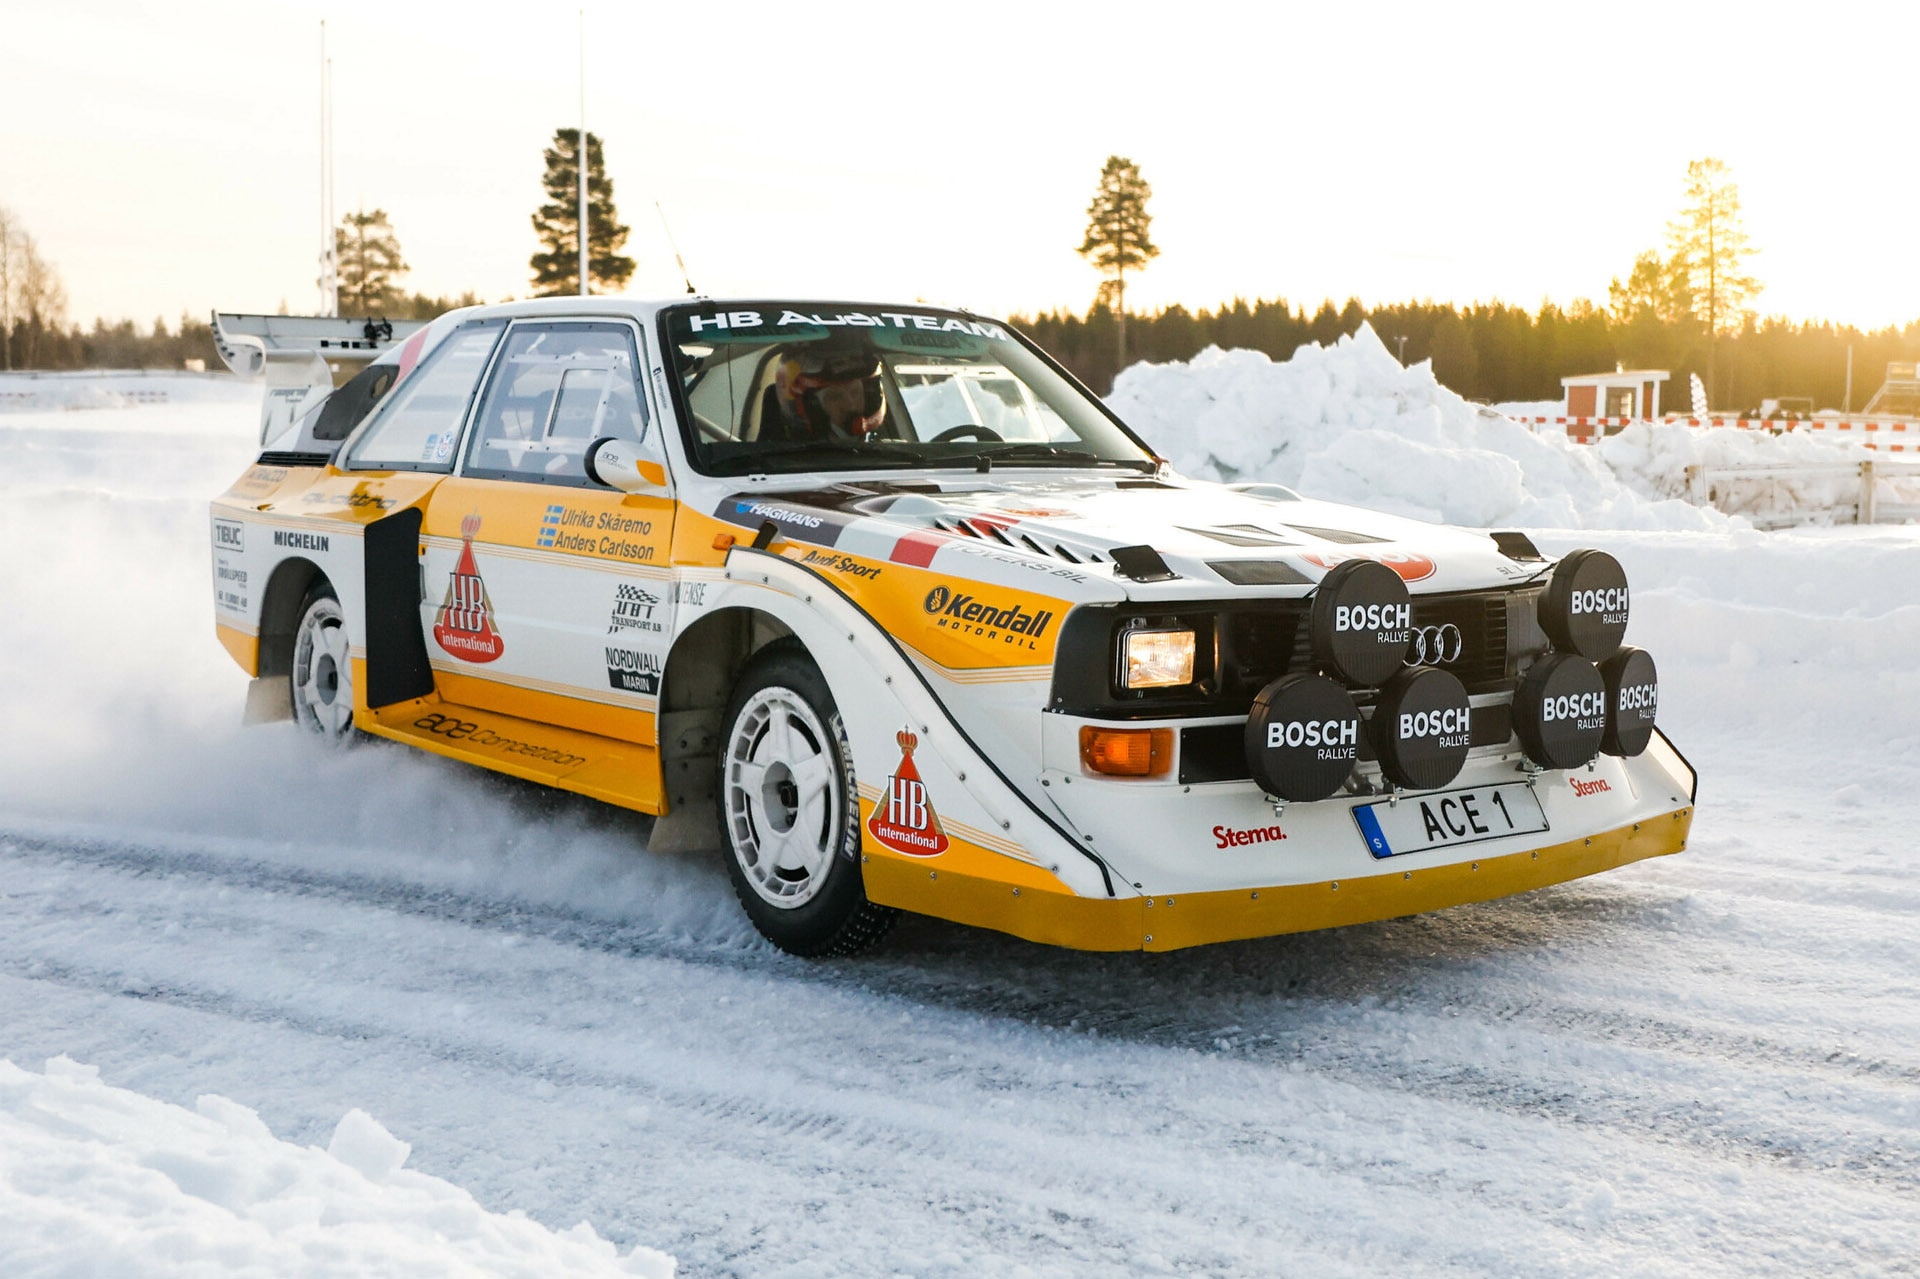 1985 Audi Sport Quattro S1 in race livery driving in the snow 